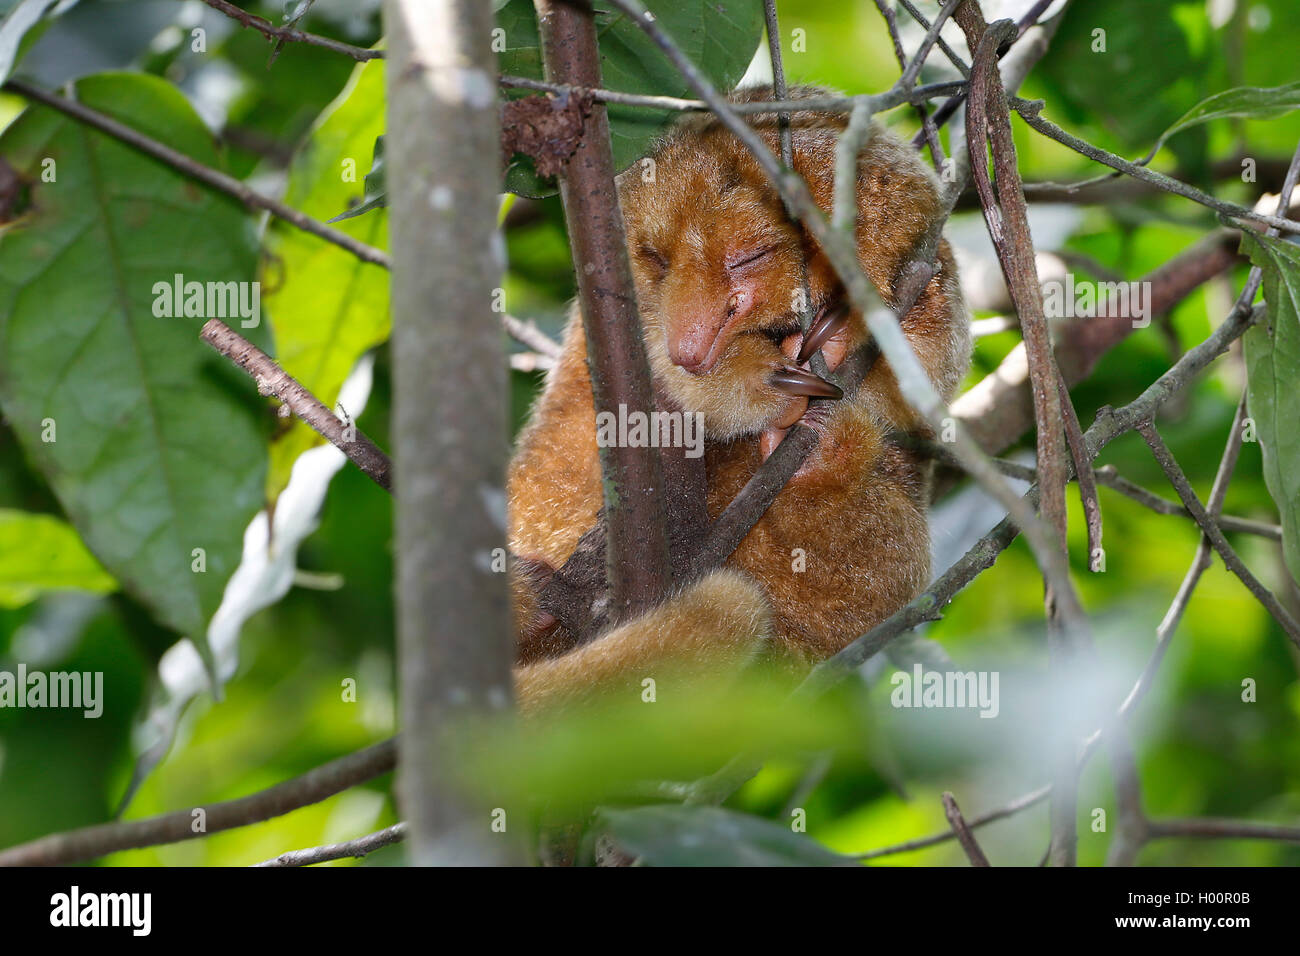 Silky anteater, Pygmy anteater (Cyclopes didactylus), sleeping in a shrub, Costa Rica Stock Photo